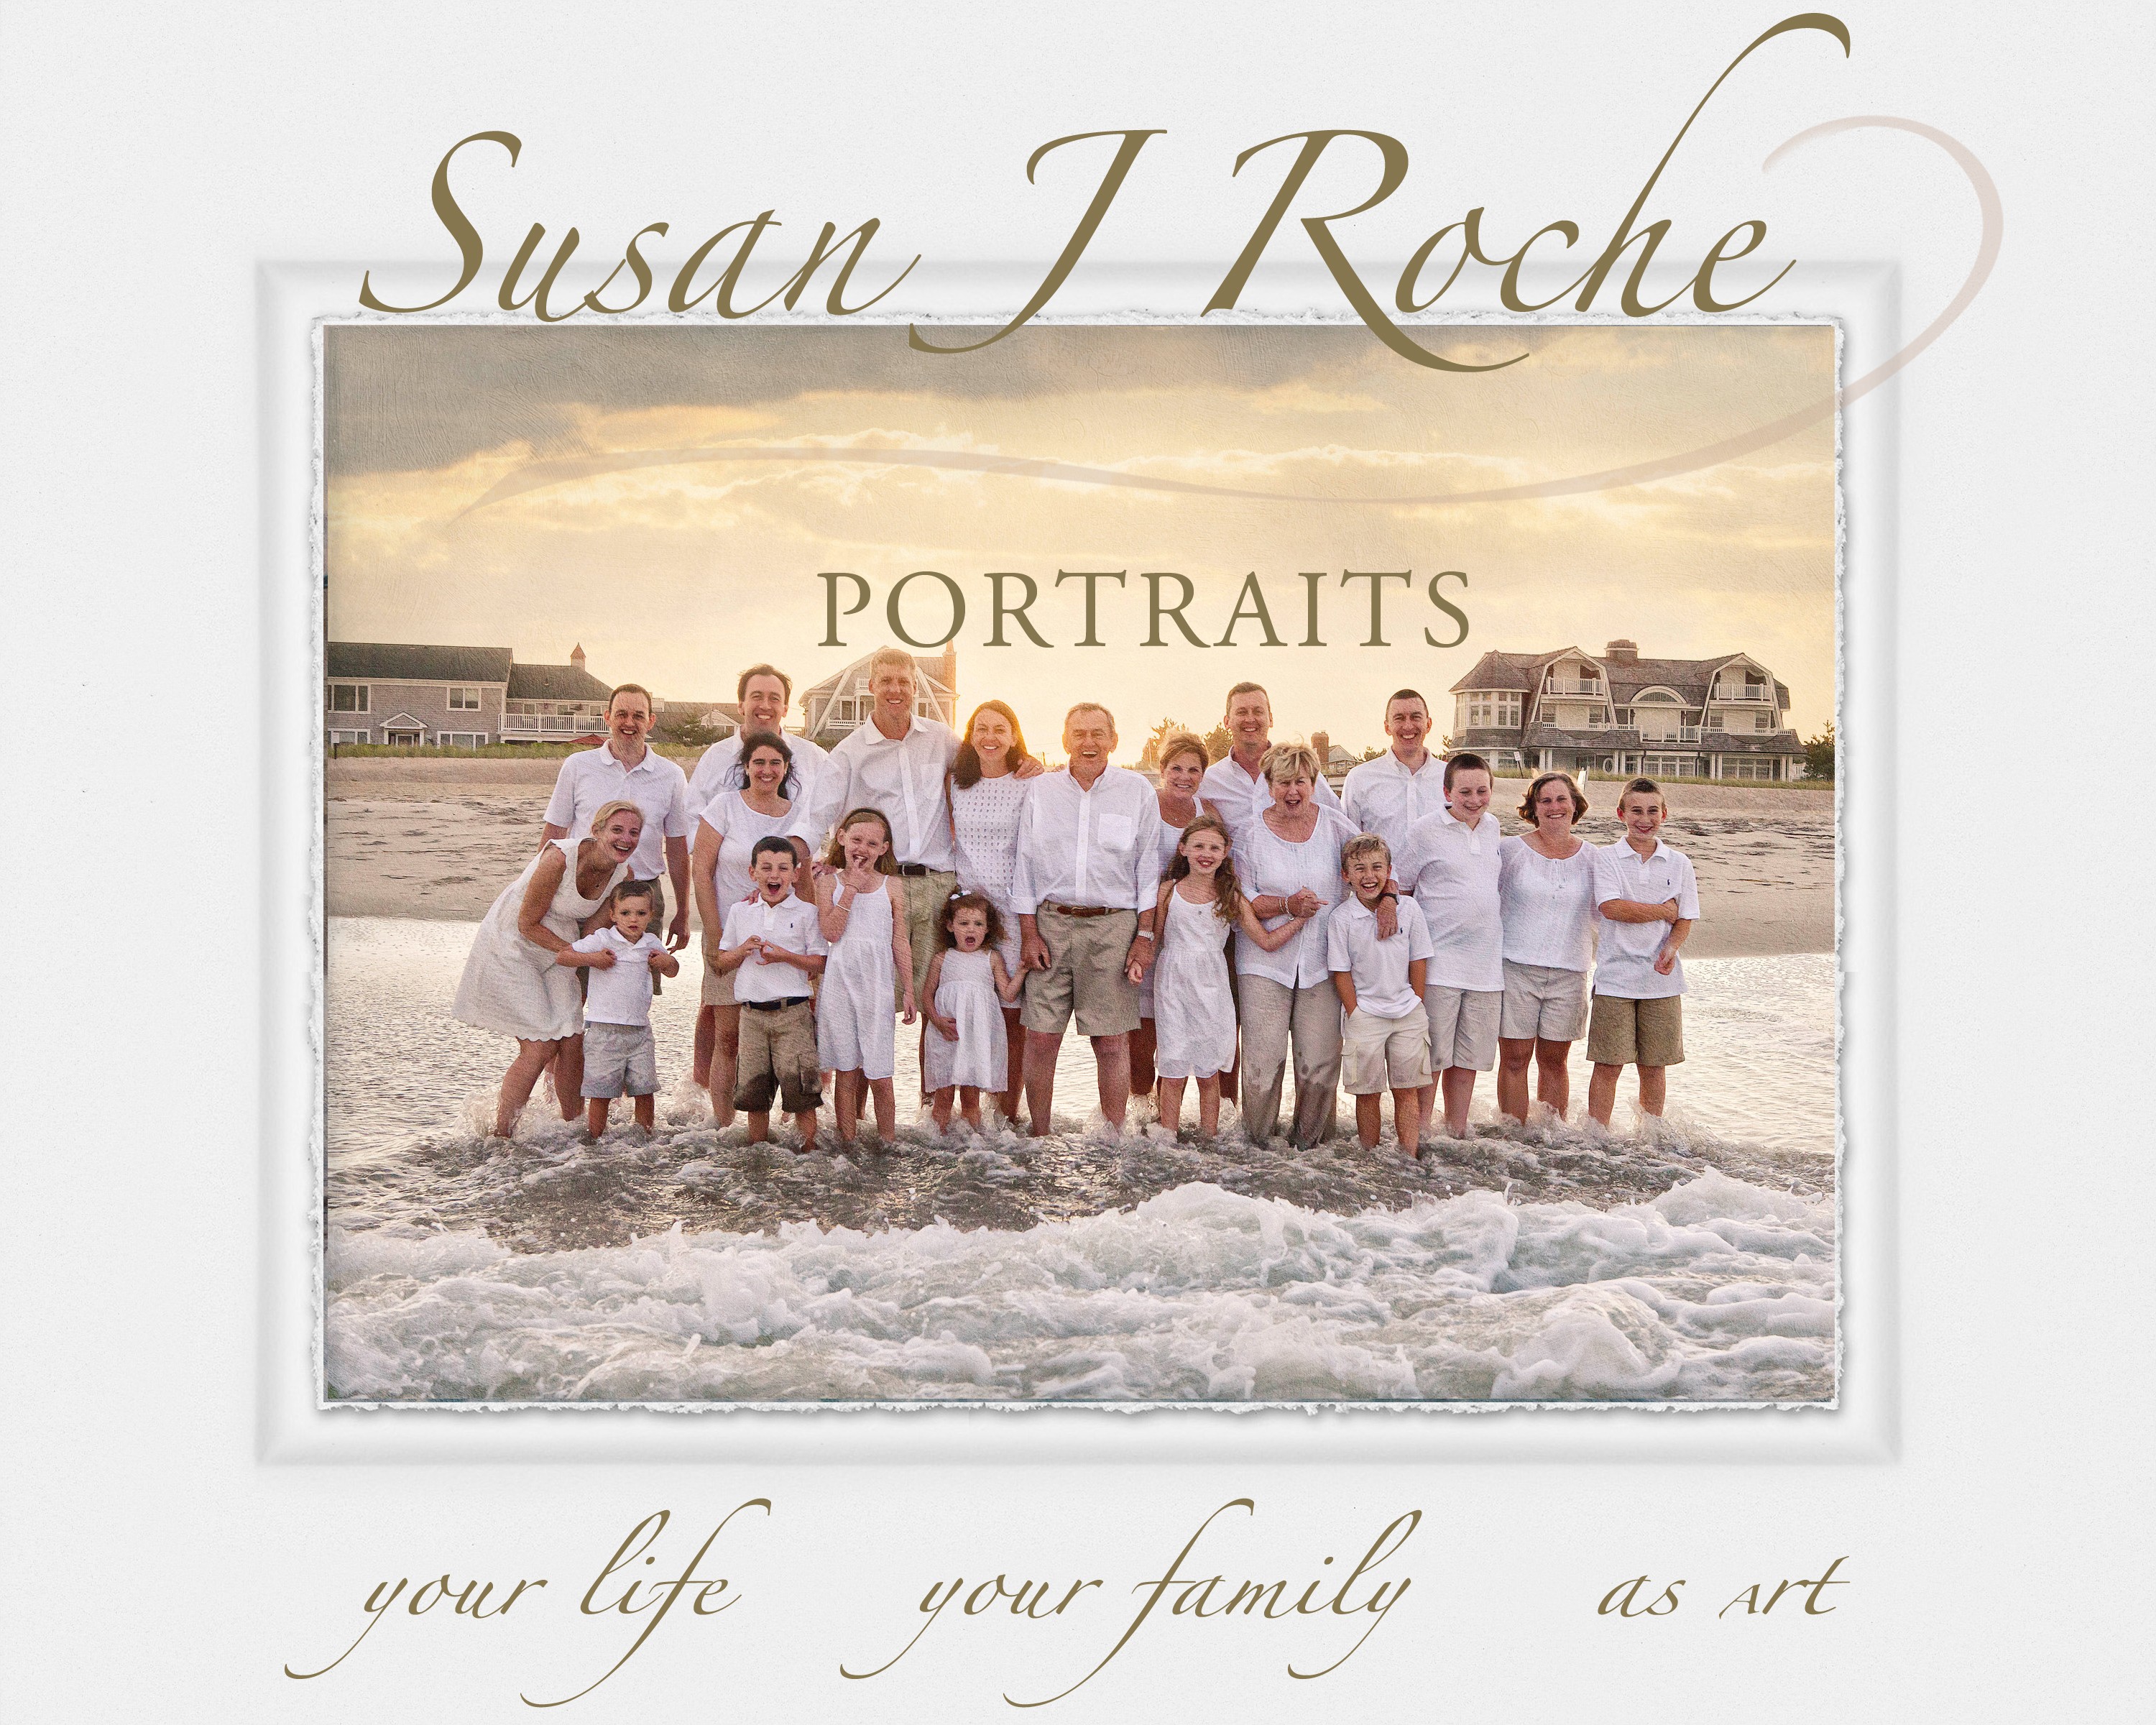 Susan J Roche Portraits and Gallery